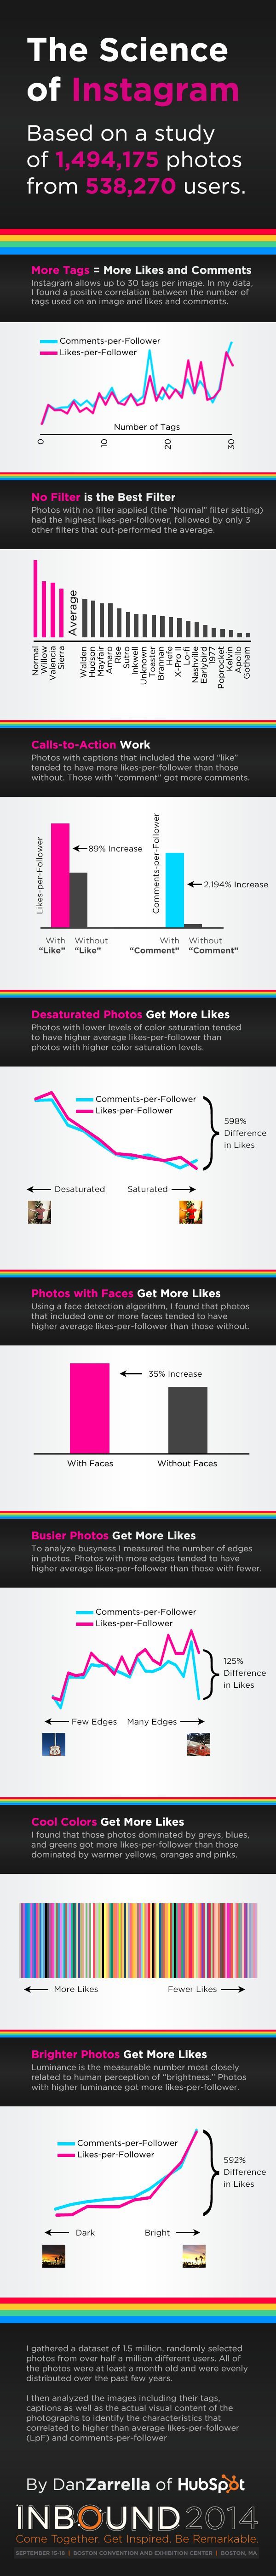 The Science Of Instagram